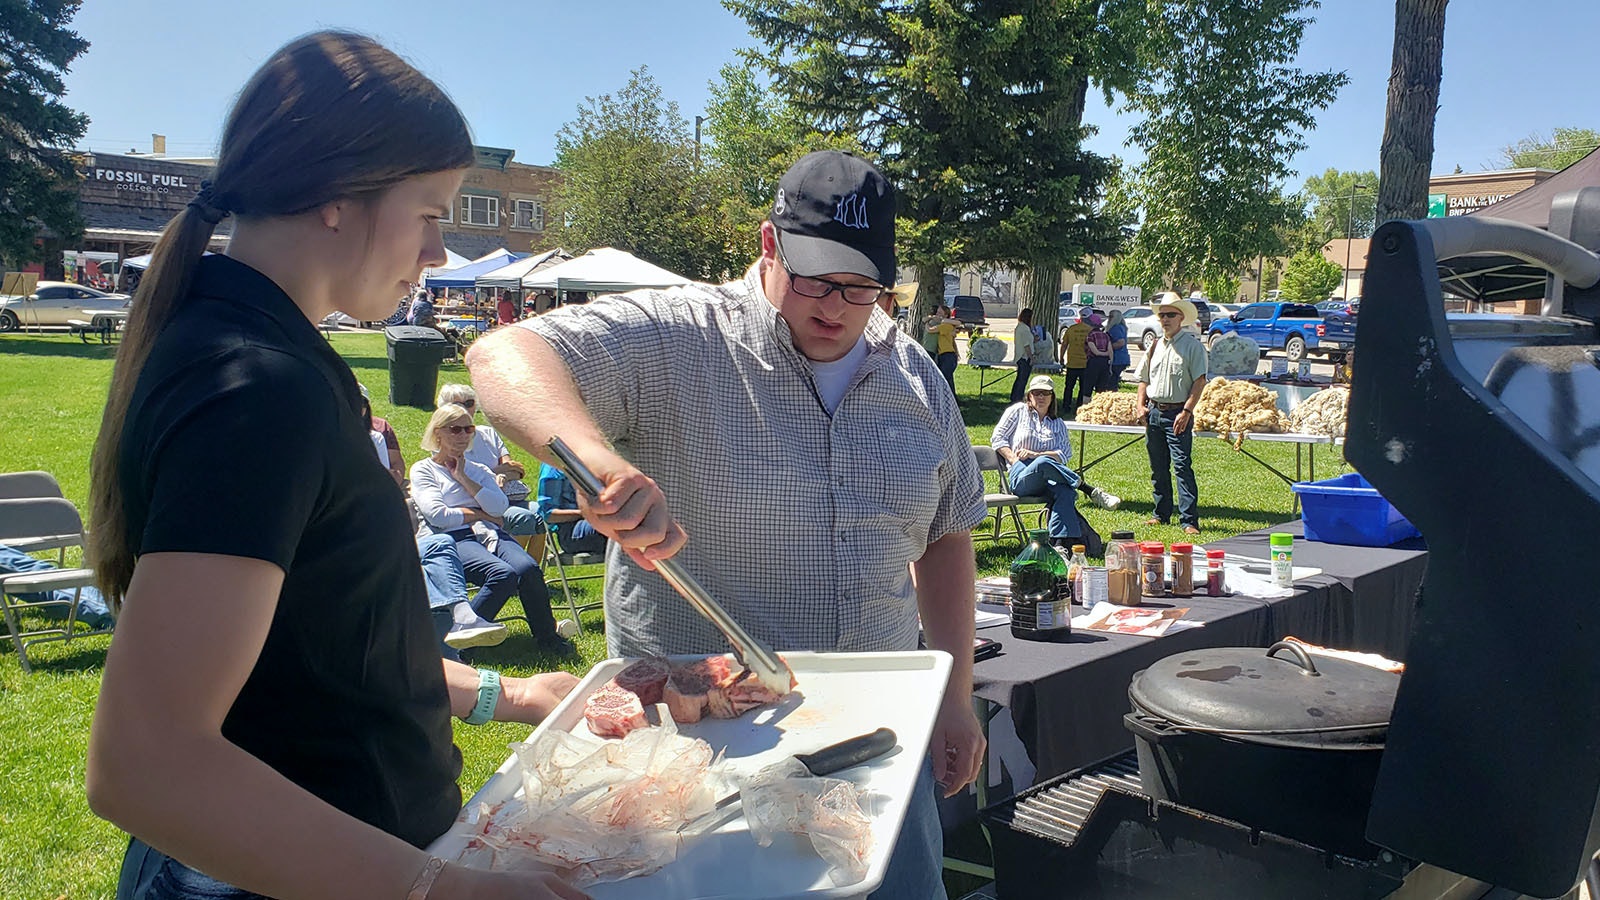 Meat scientist and flavor expert Dr. Cody Gifford right places lamb steaks on the grill while a volunteer holds the tray of meat for him.